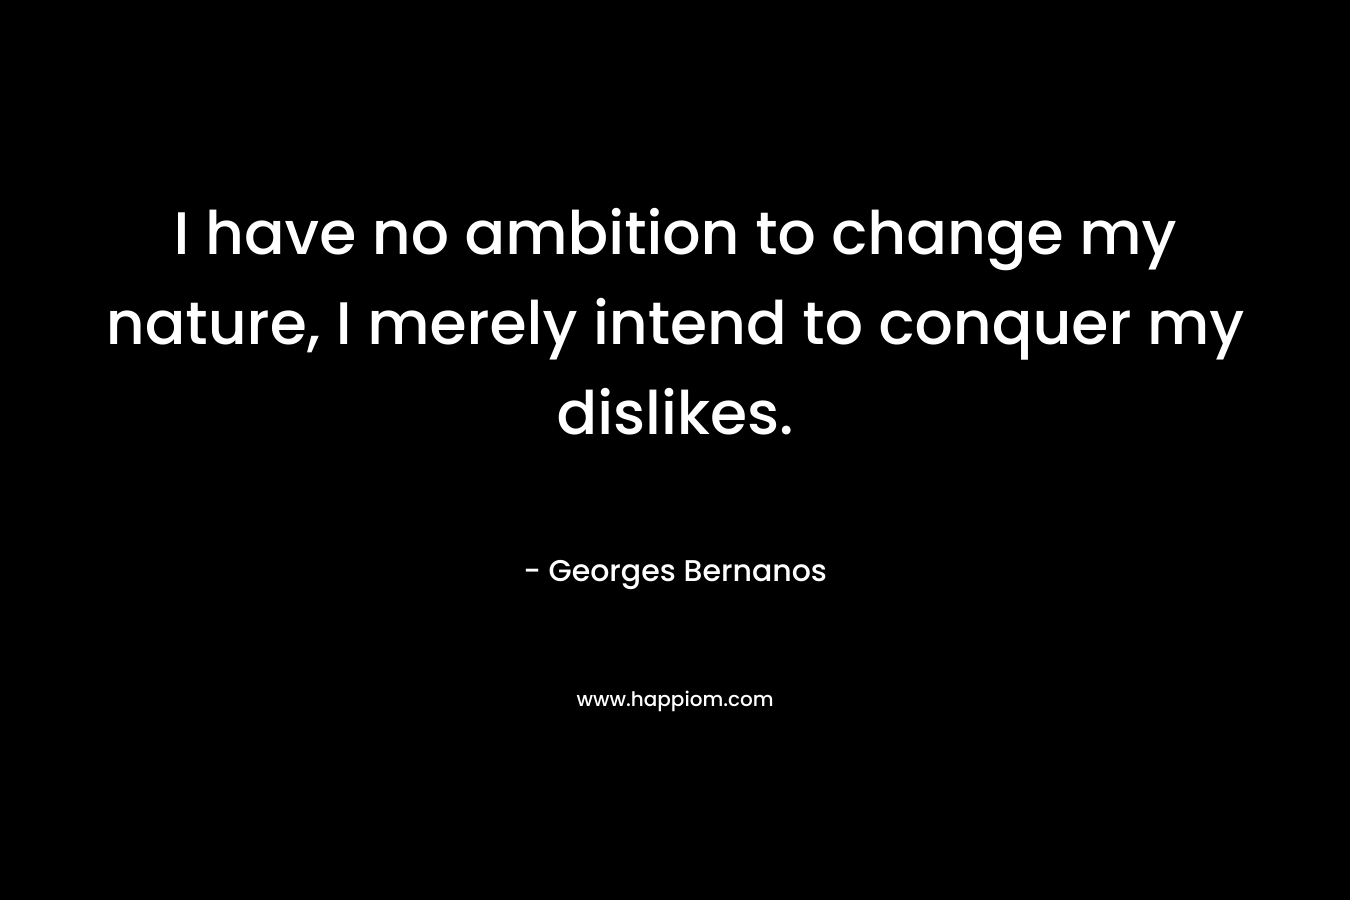 I have no ambition to change my nature, I merely intend to conquer my dislikes. – Georges Bernanos